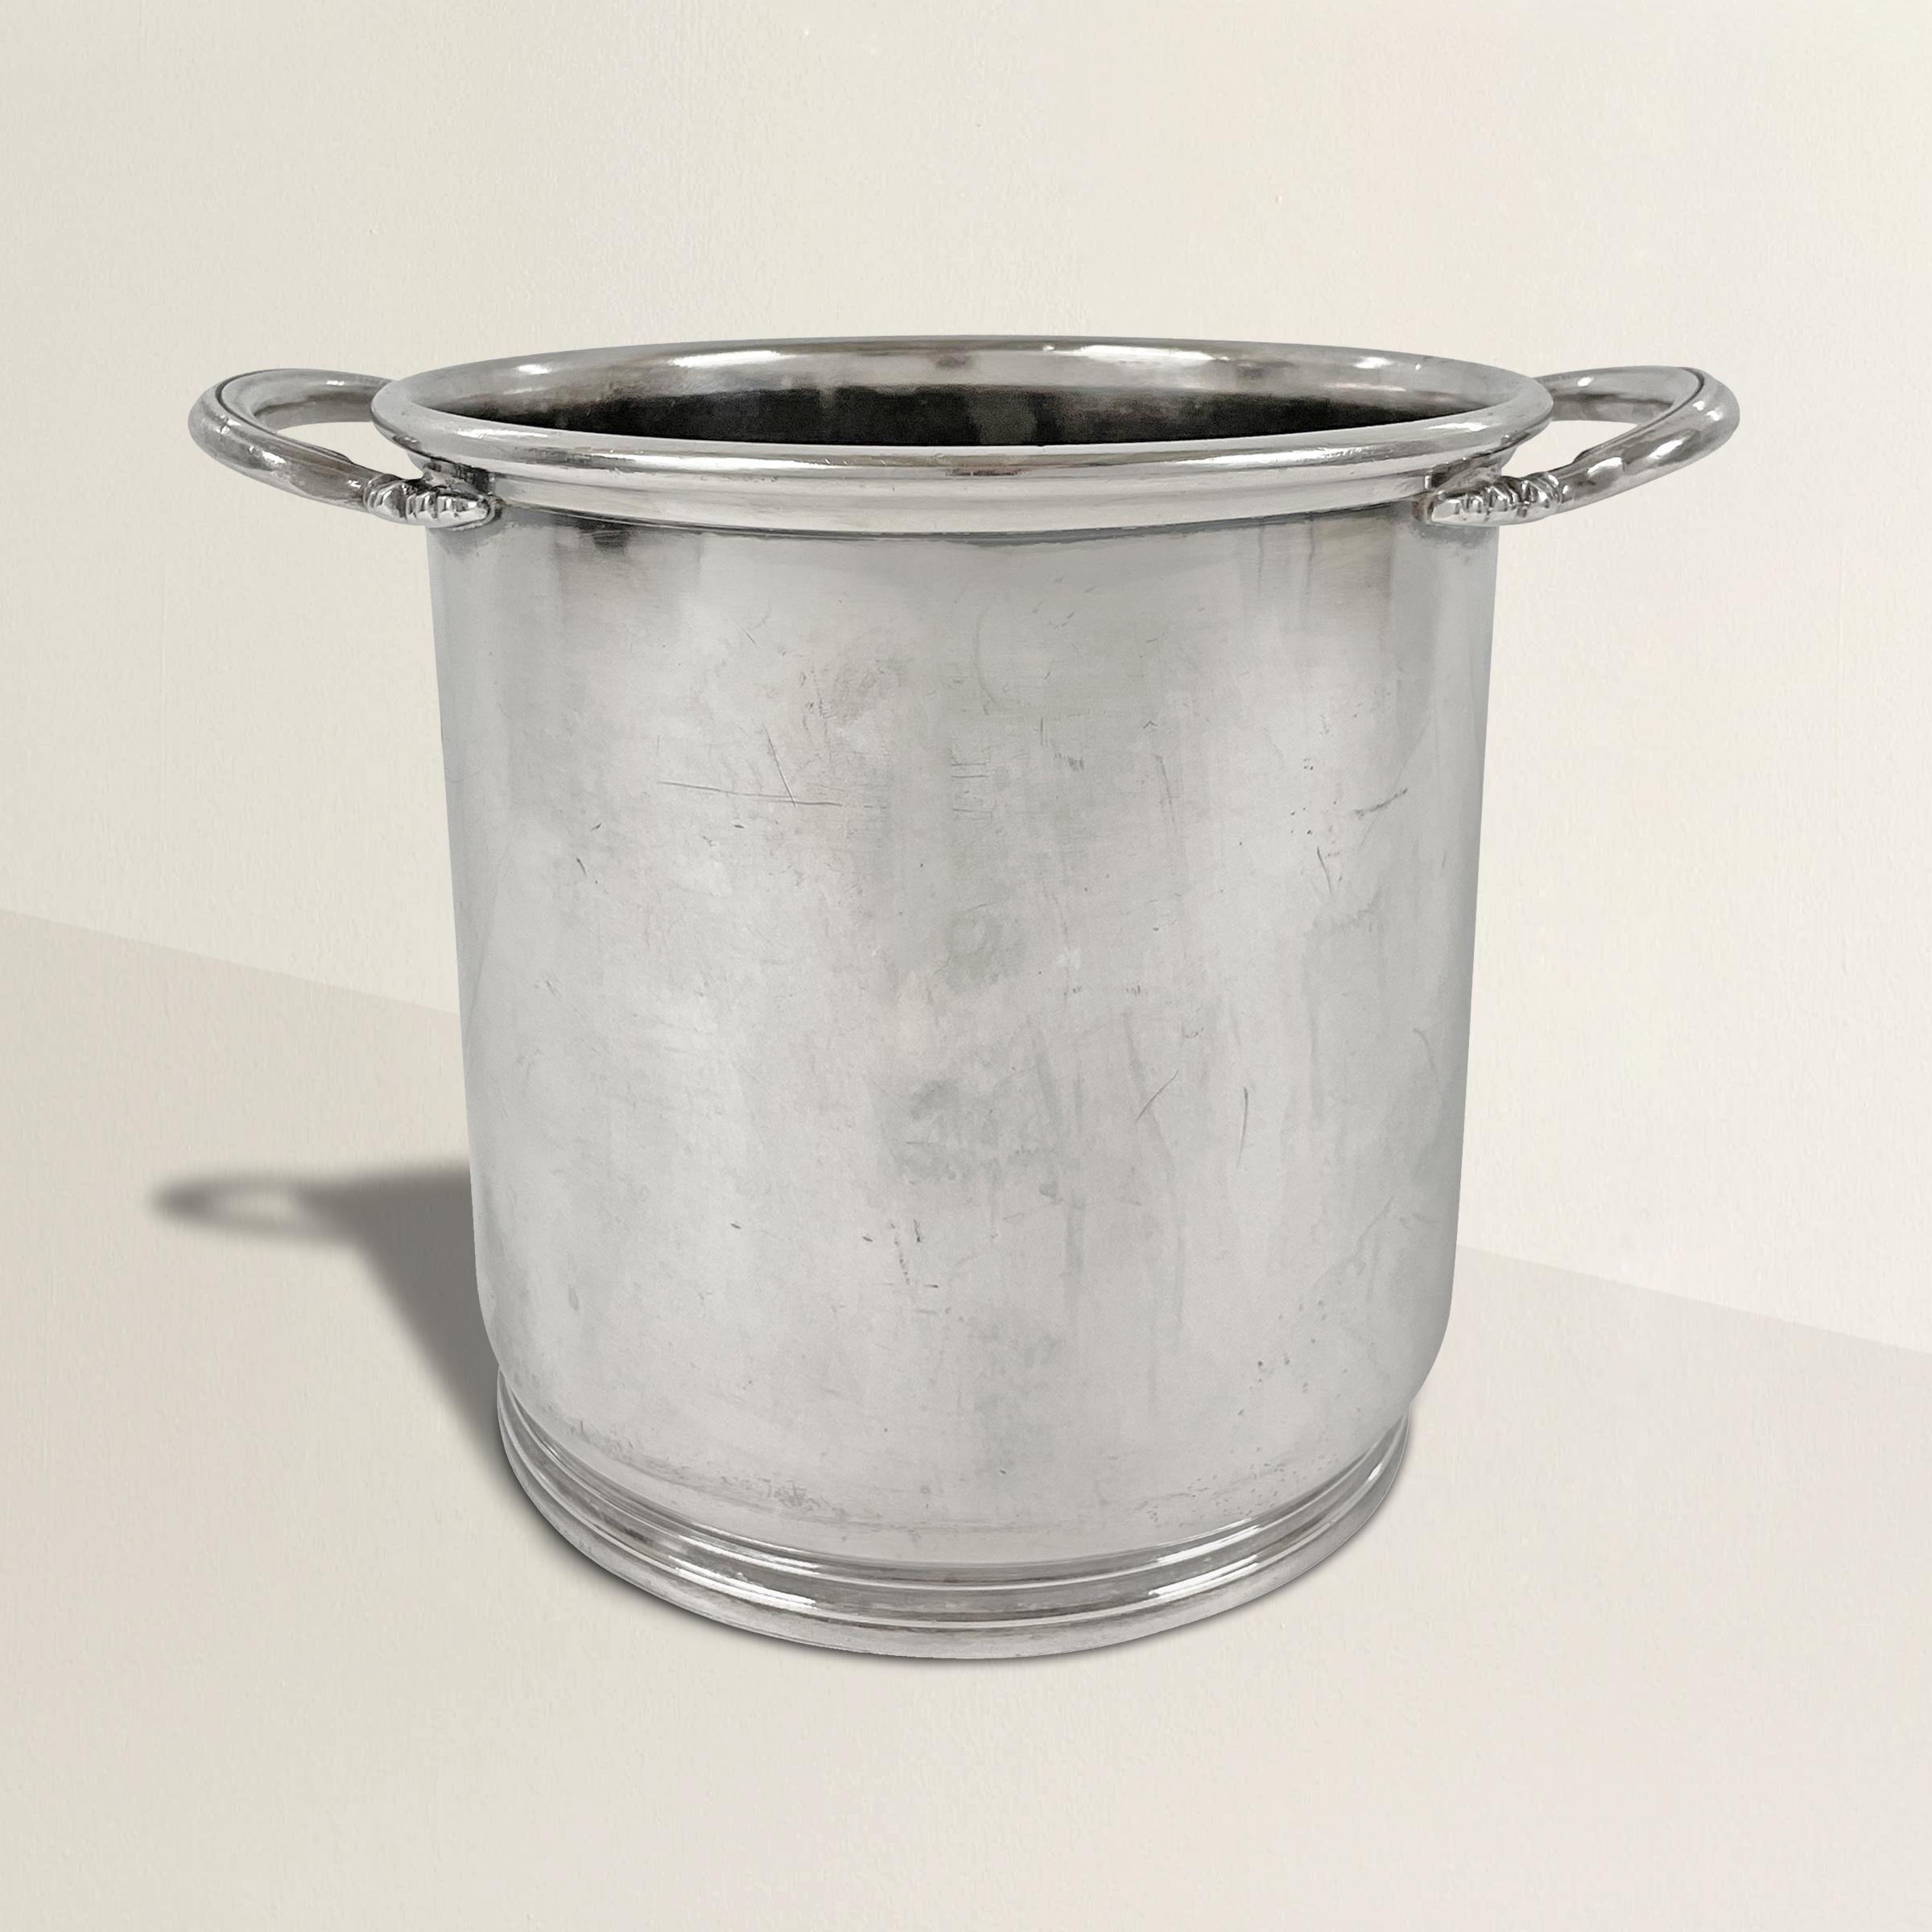 A wonderful vintage hotel silver champagne ice bucket with a chic form with two handles, straight sides, and a simple foot. Marked, 